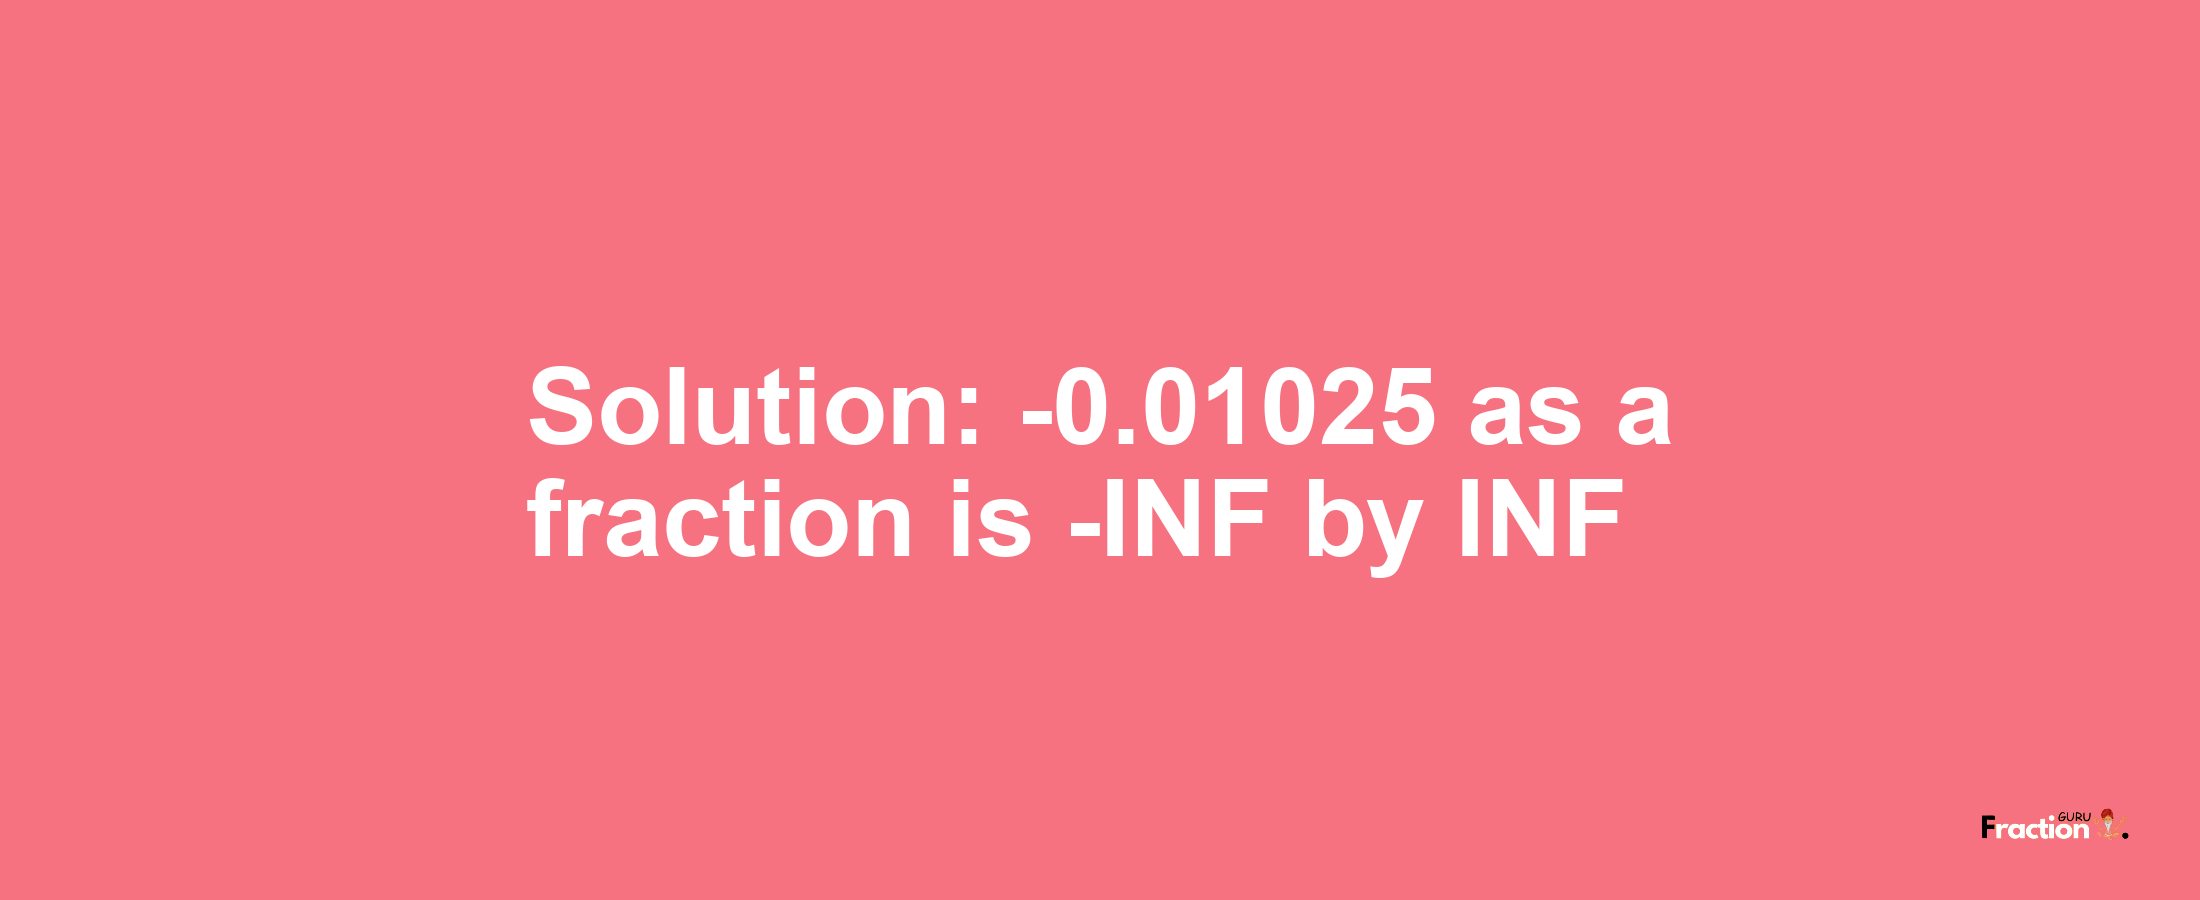 Solution:-0.01025 as a fraction is -INF/INF